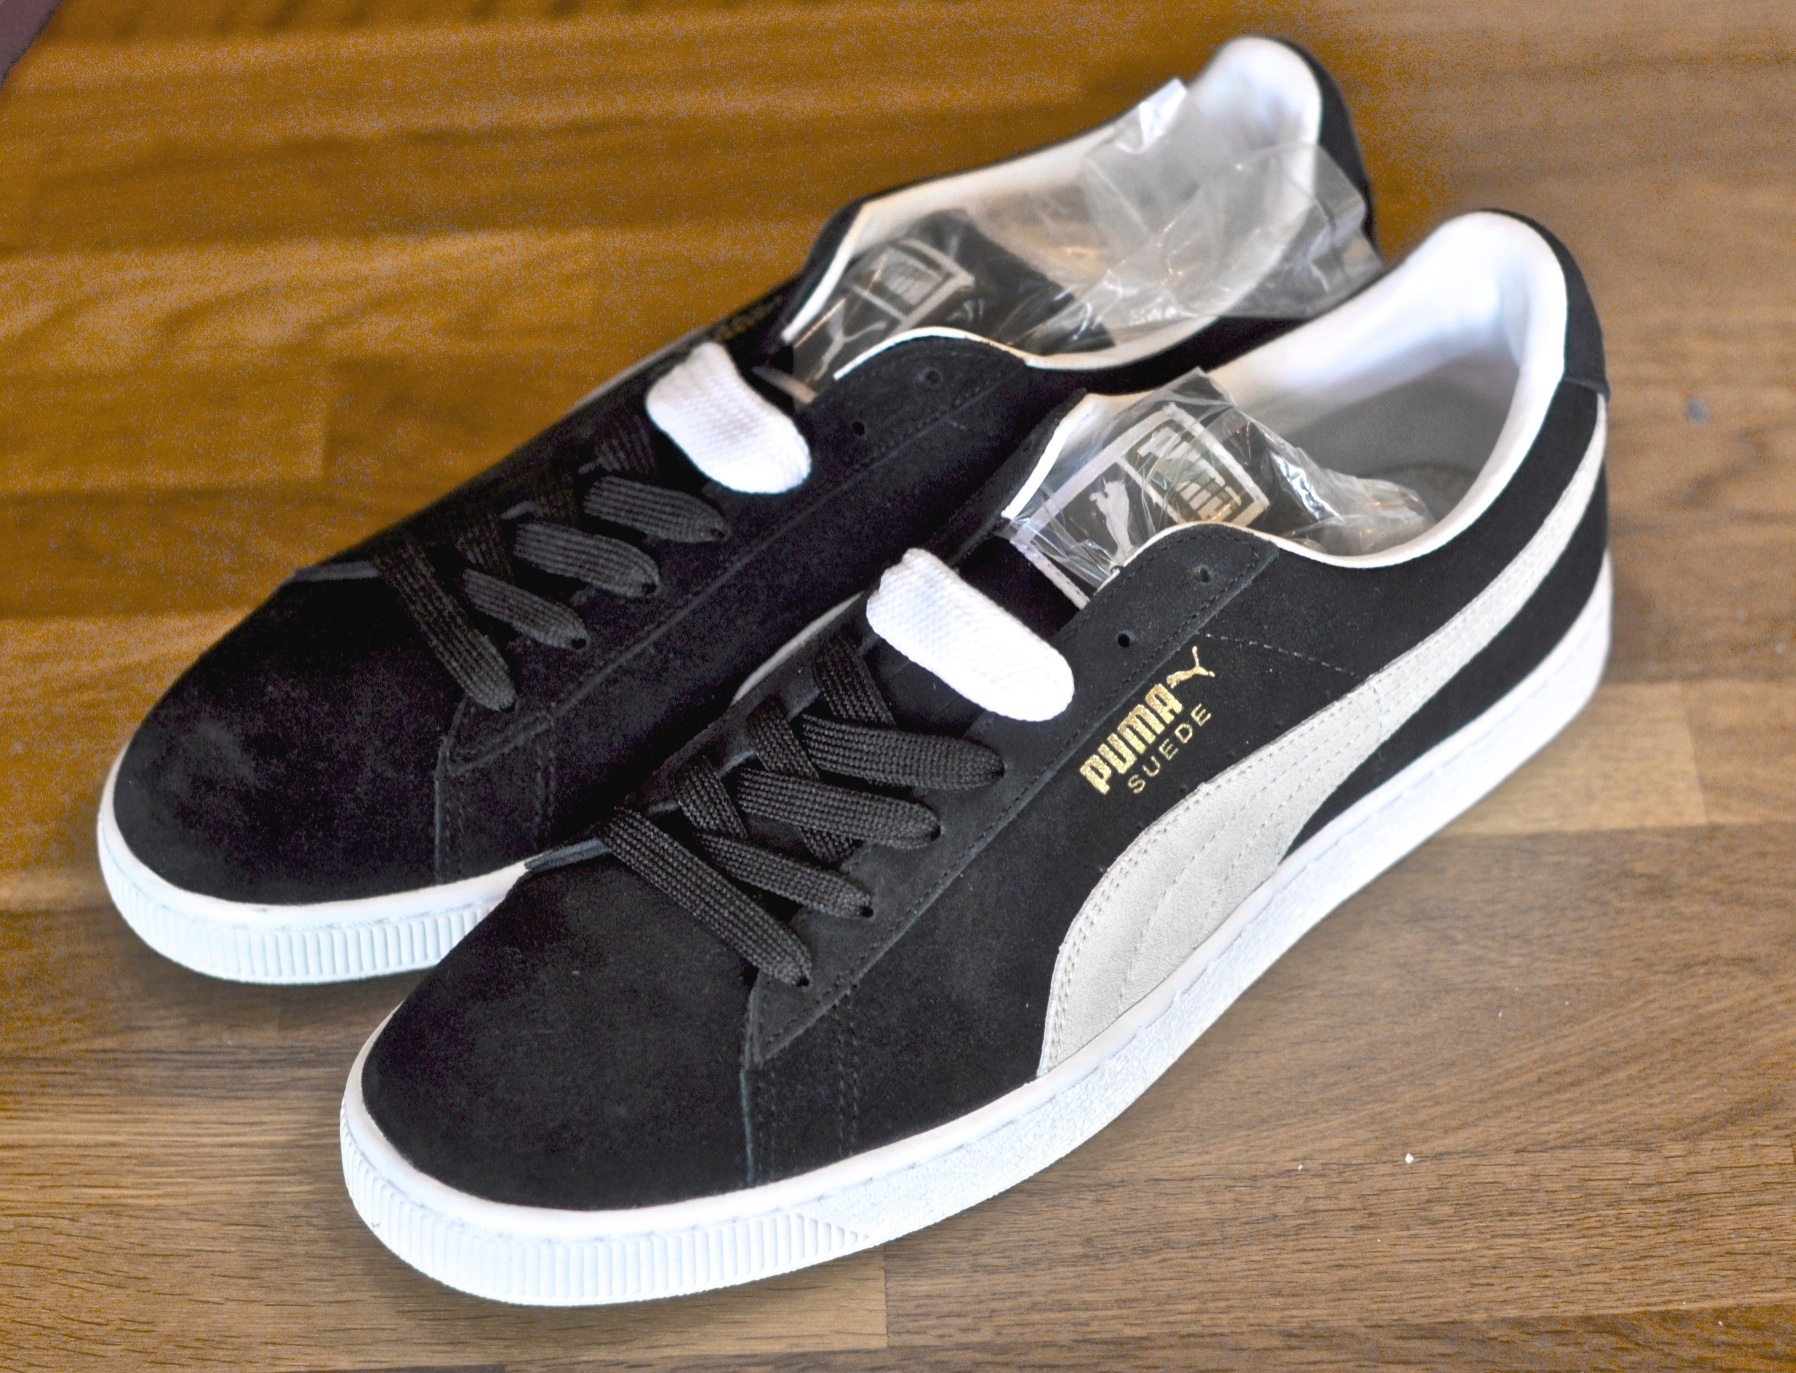 PUMA Suede Classic+ Sneakers Black and White Mens NEW | eBay